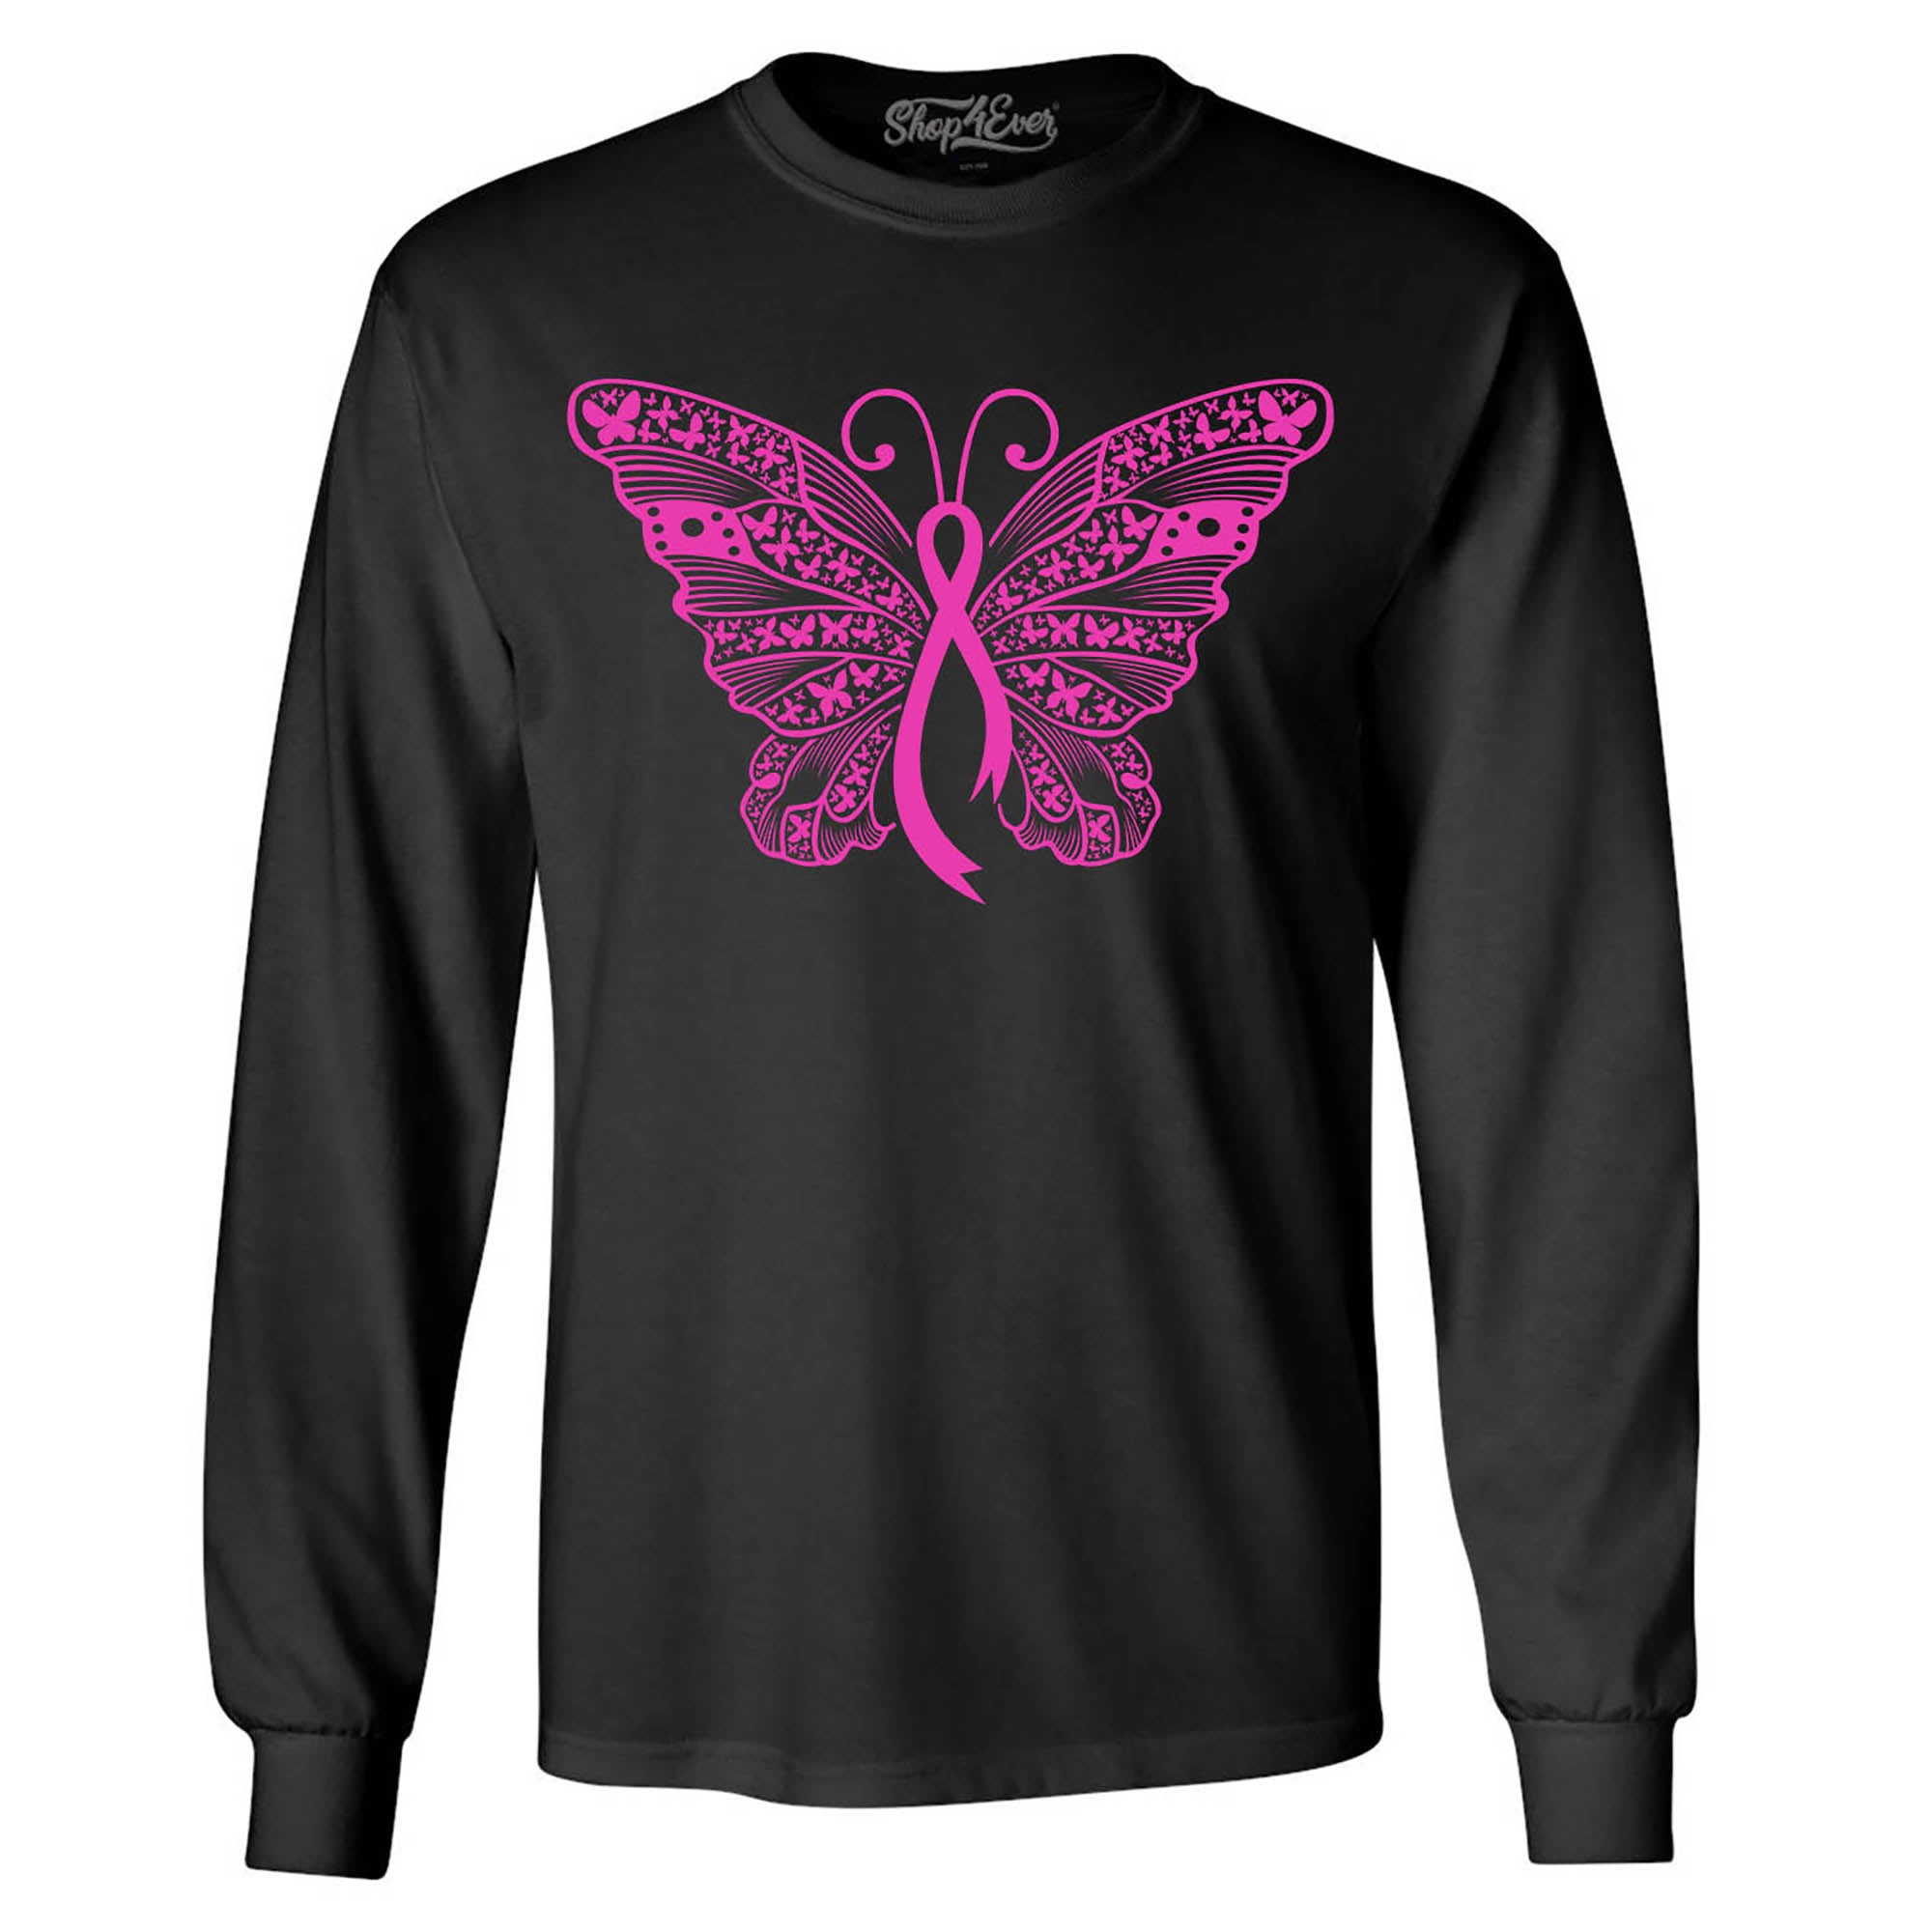 Pink Ribbon Butterfly Breast Cancer Awareness Long Sleeve Shirt